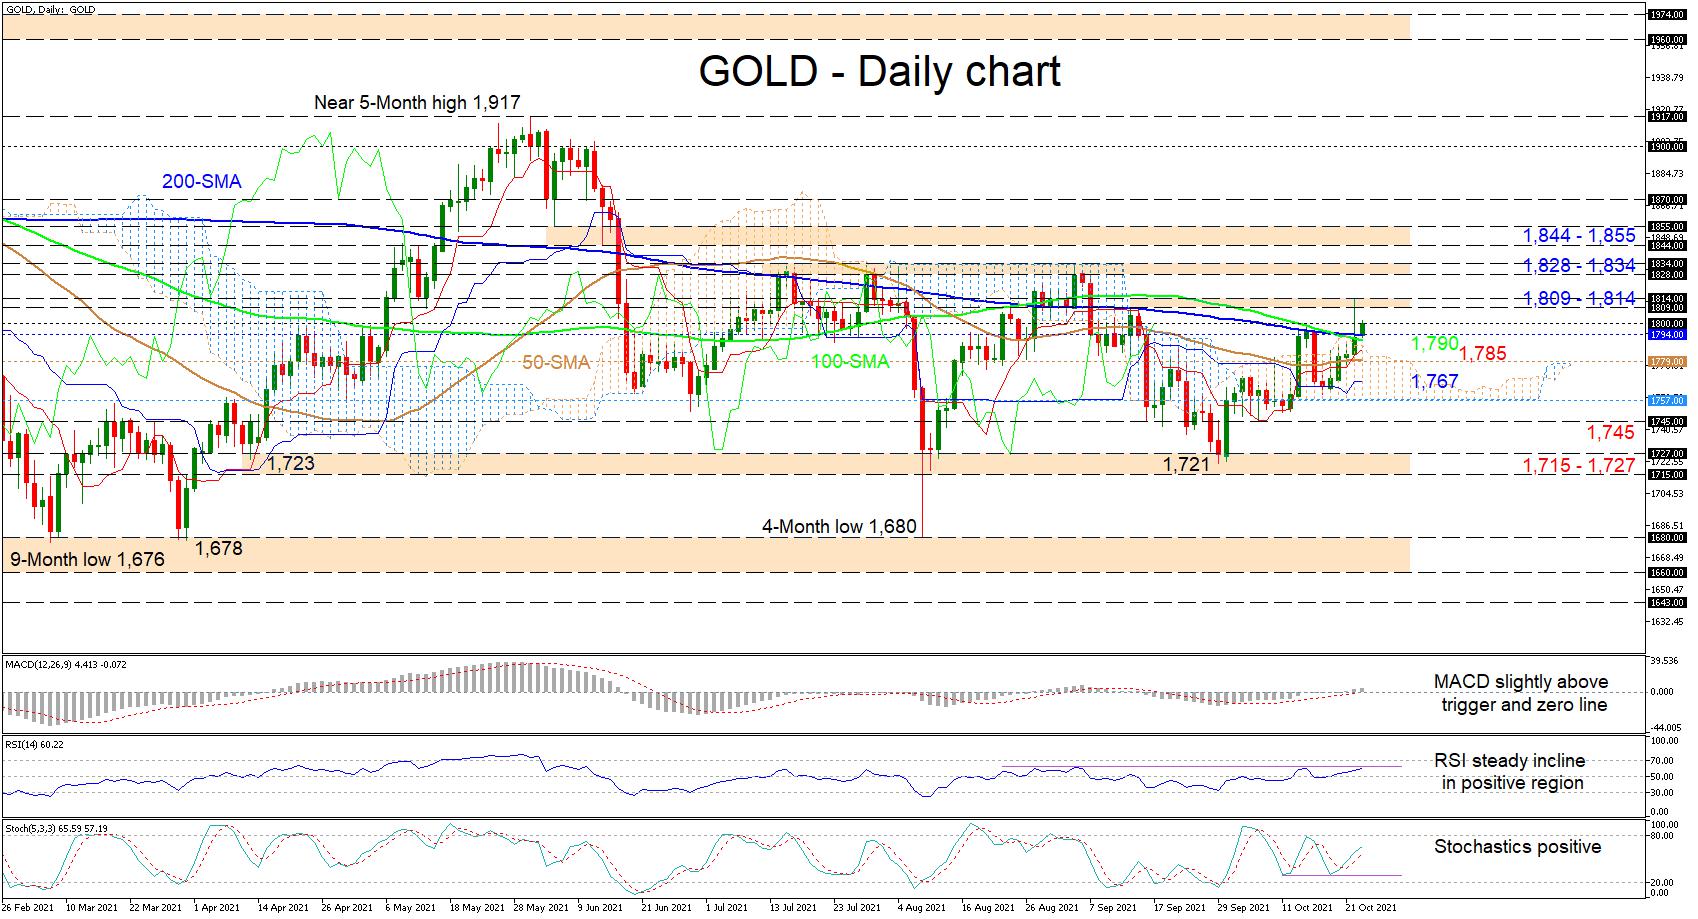 Technical analysis: Gold fails to leave 1,800 level in the dust, upside shaky